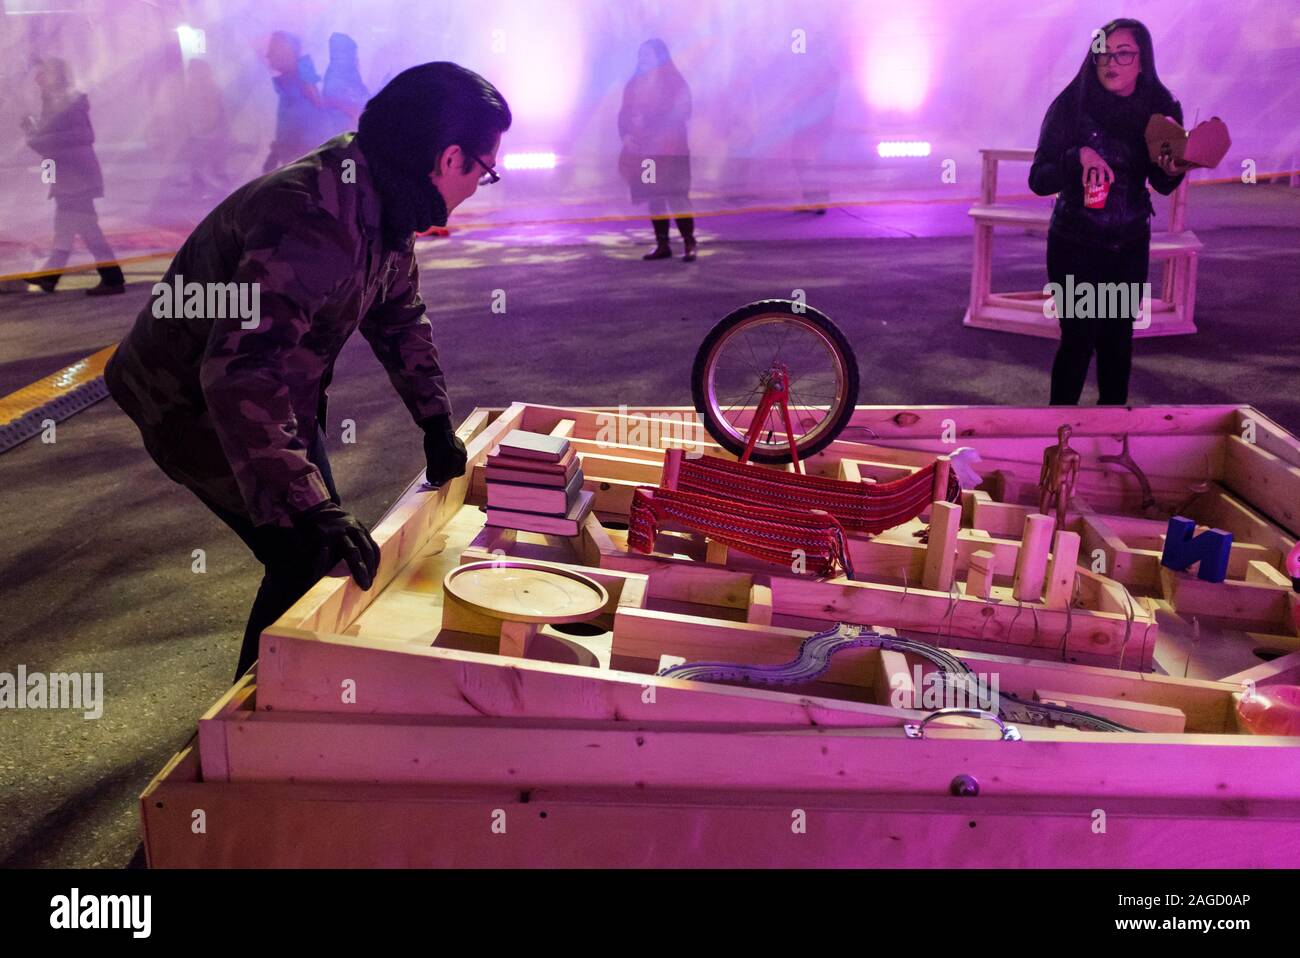 Participants play with a larger-than-life labyrinth tilting maze game at the nighttime Nuit Blanche public art events in Winnipeg, Manitoba Stock Photo